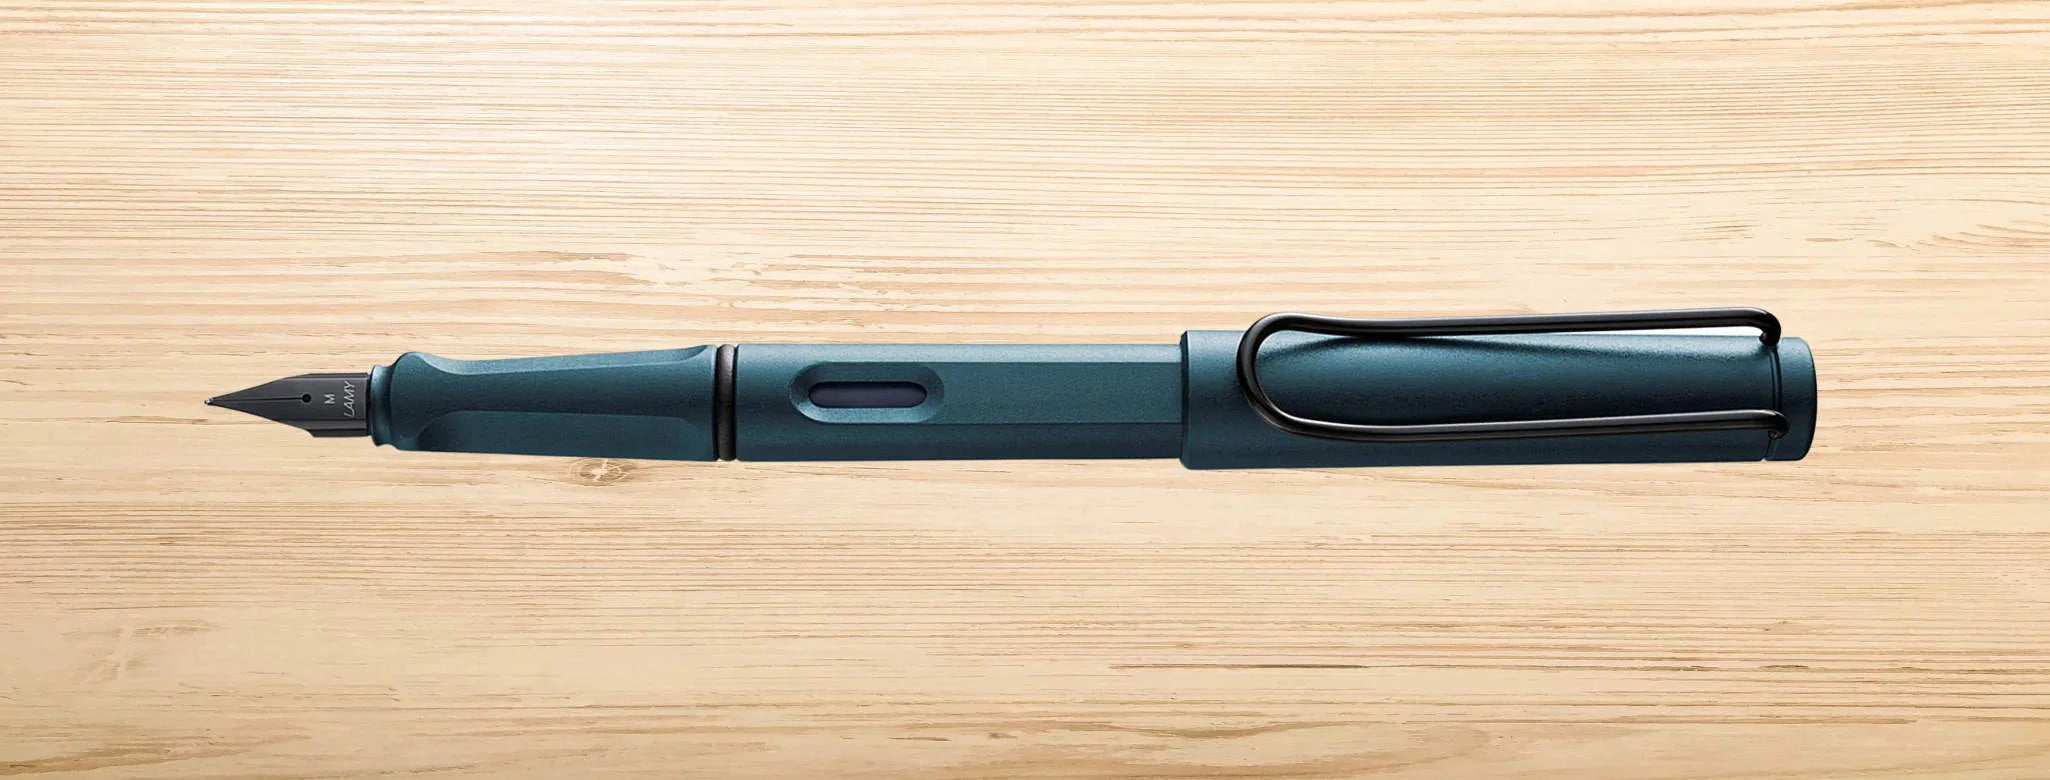 Looking Back at 10 Years of LAMY Special Edition Fountain Pens - 2016 - 2017 - Petrol